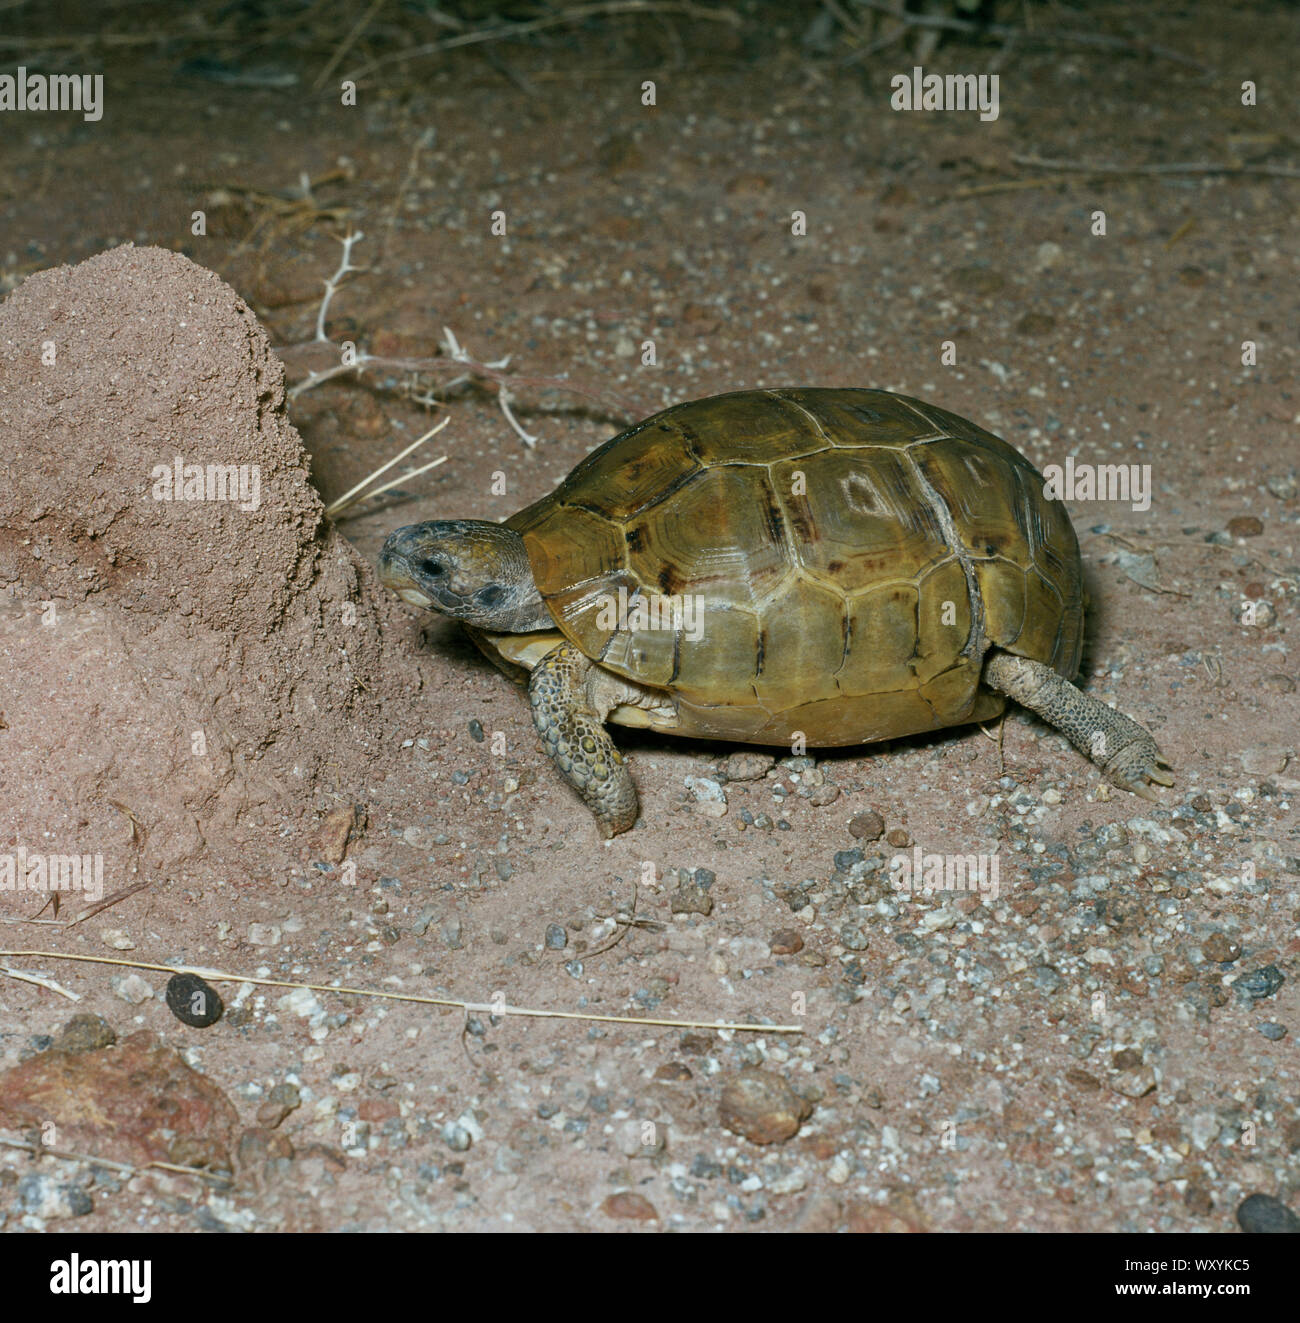 SAVANNAH HINGED TORTOISE (Kinixys belliana).  Alongside a small termite mound, crepuscular, movement activity, cooler part of day. Northern Nigeria. Stock Photo